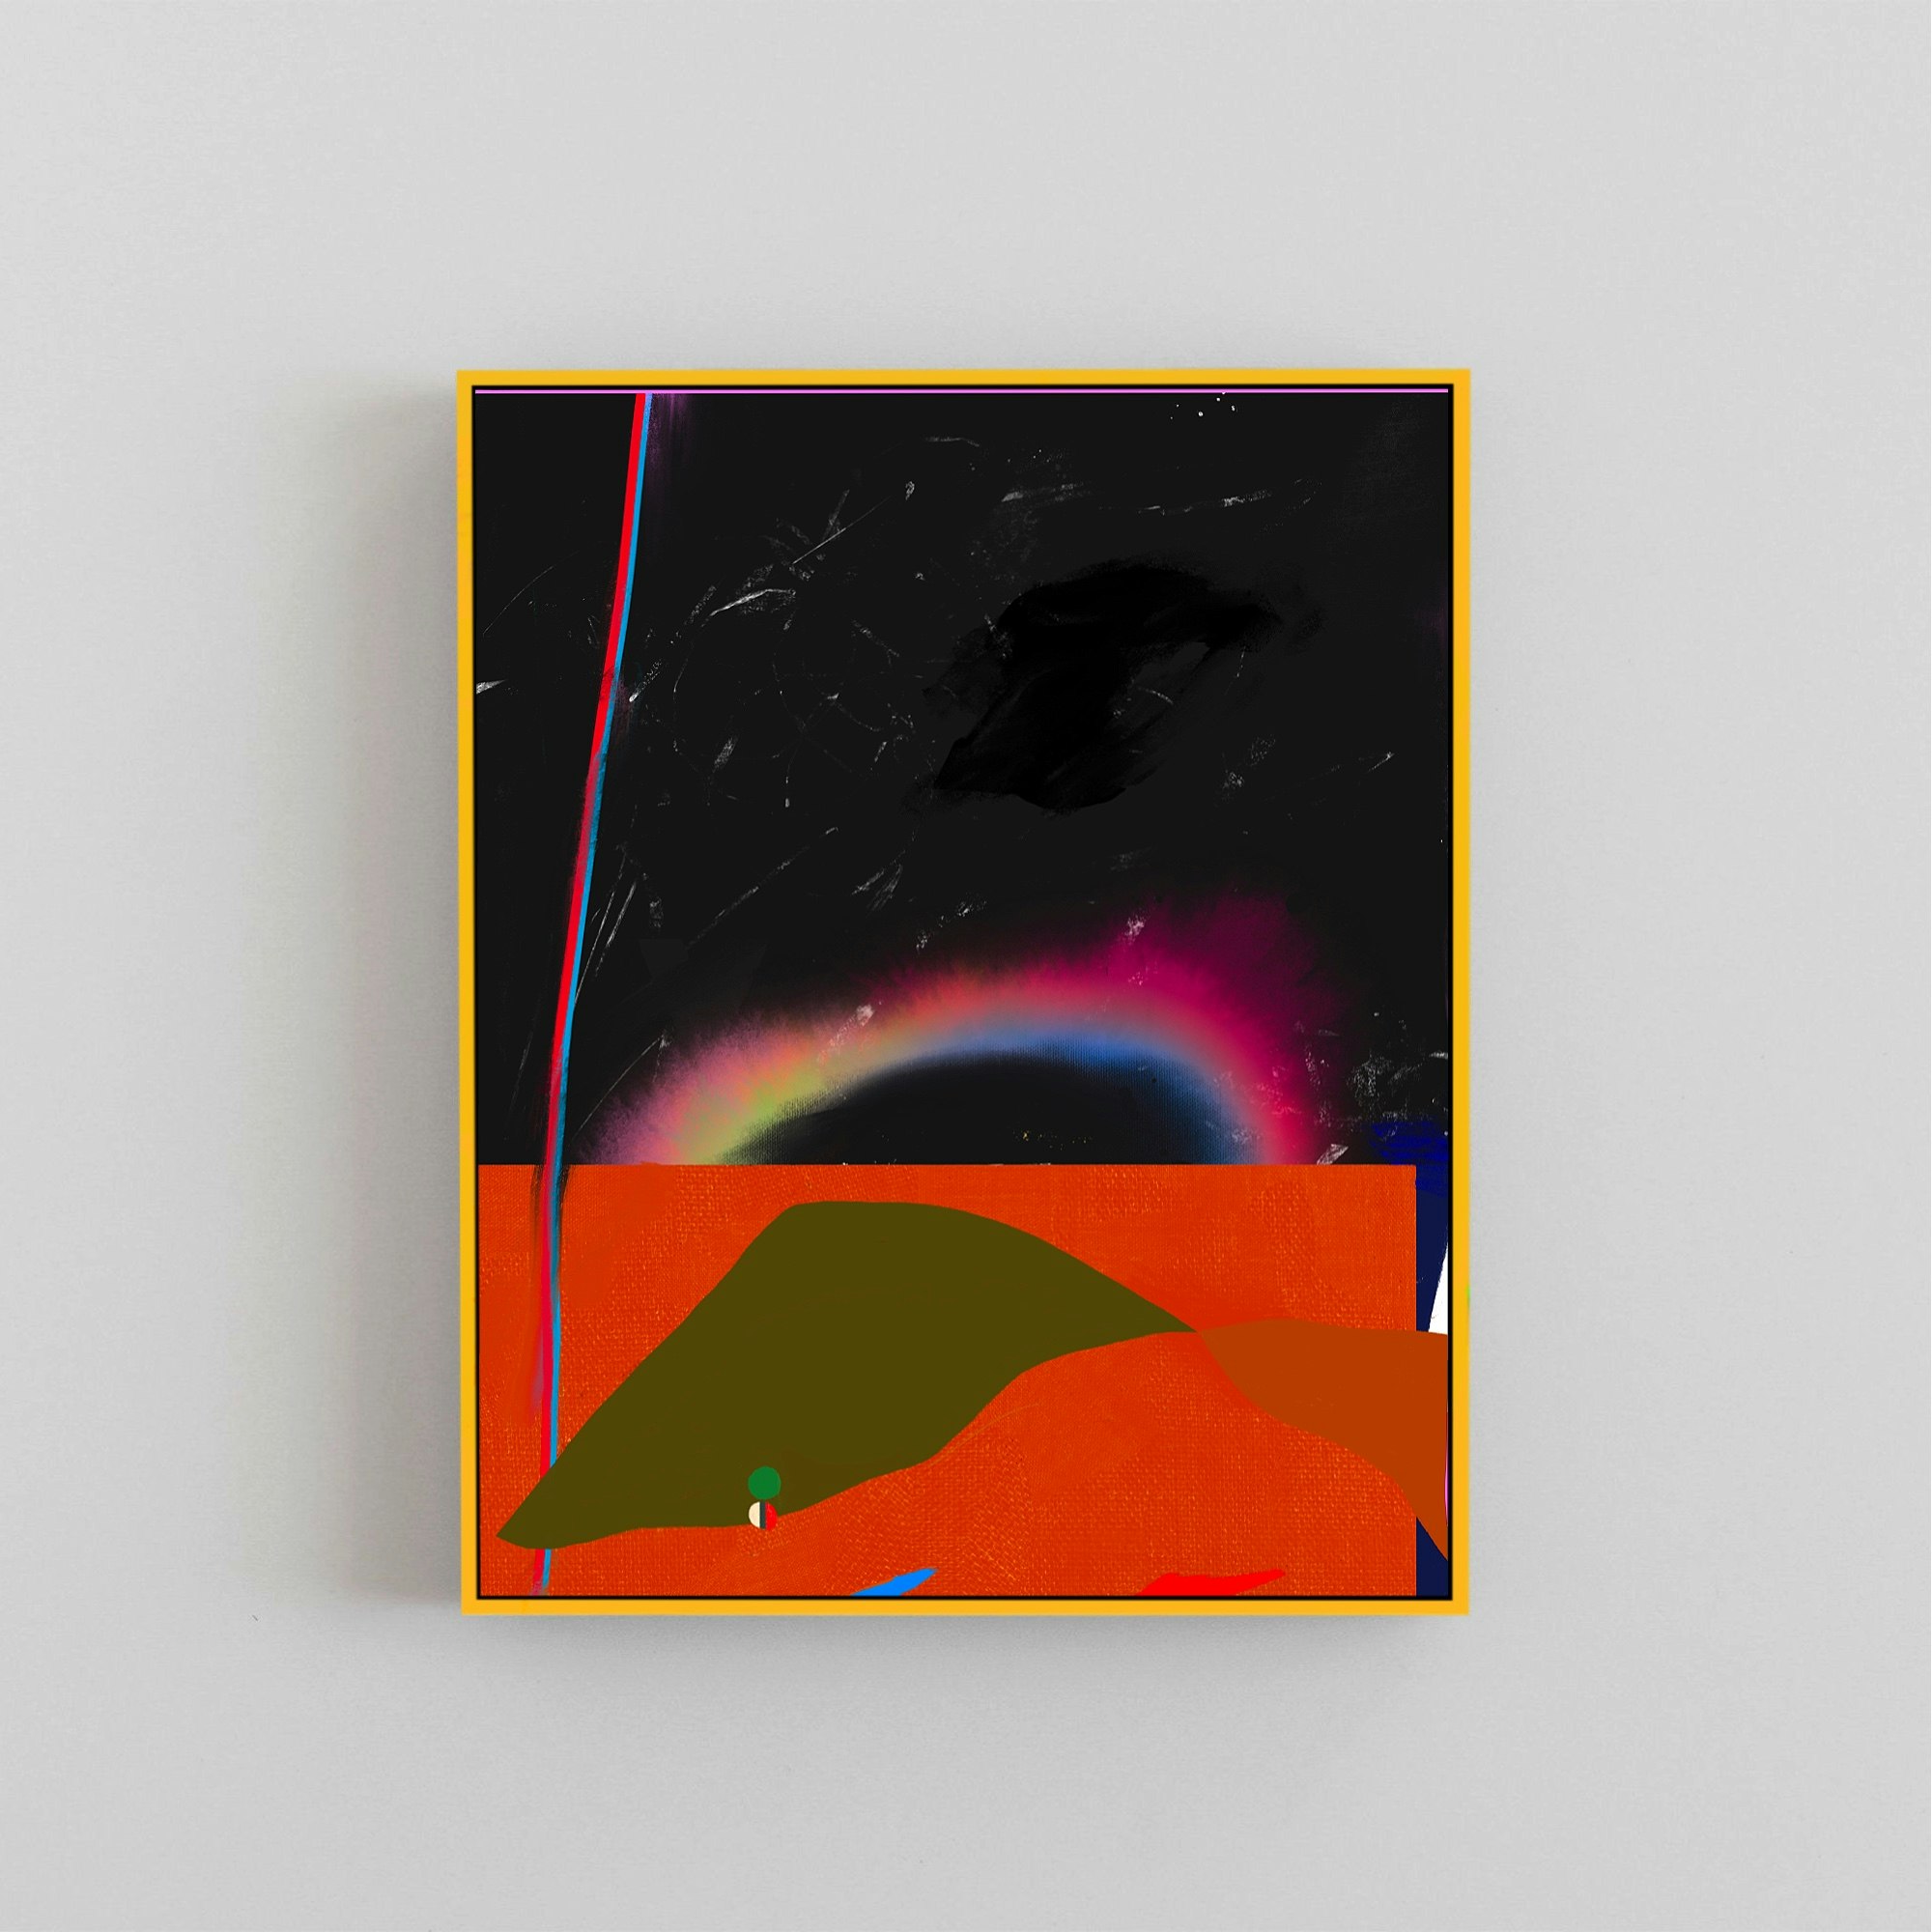 Black and Orange split abstract with a rainbow hue across the center